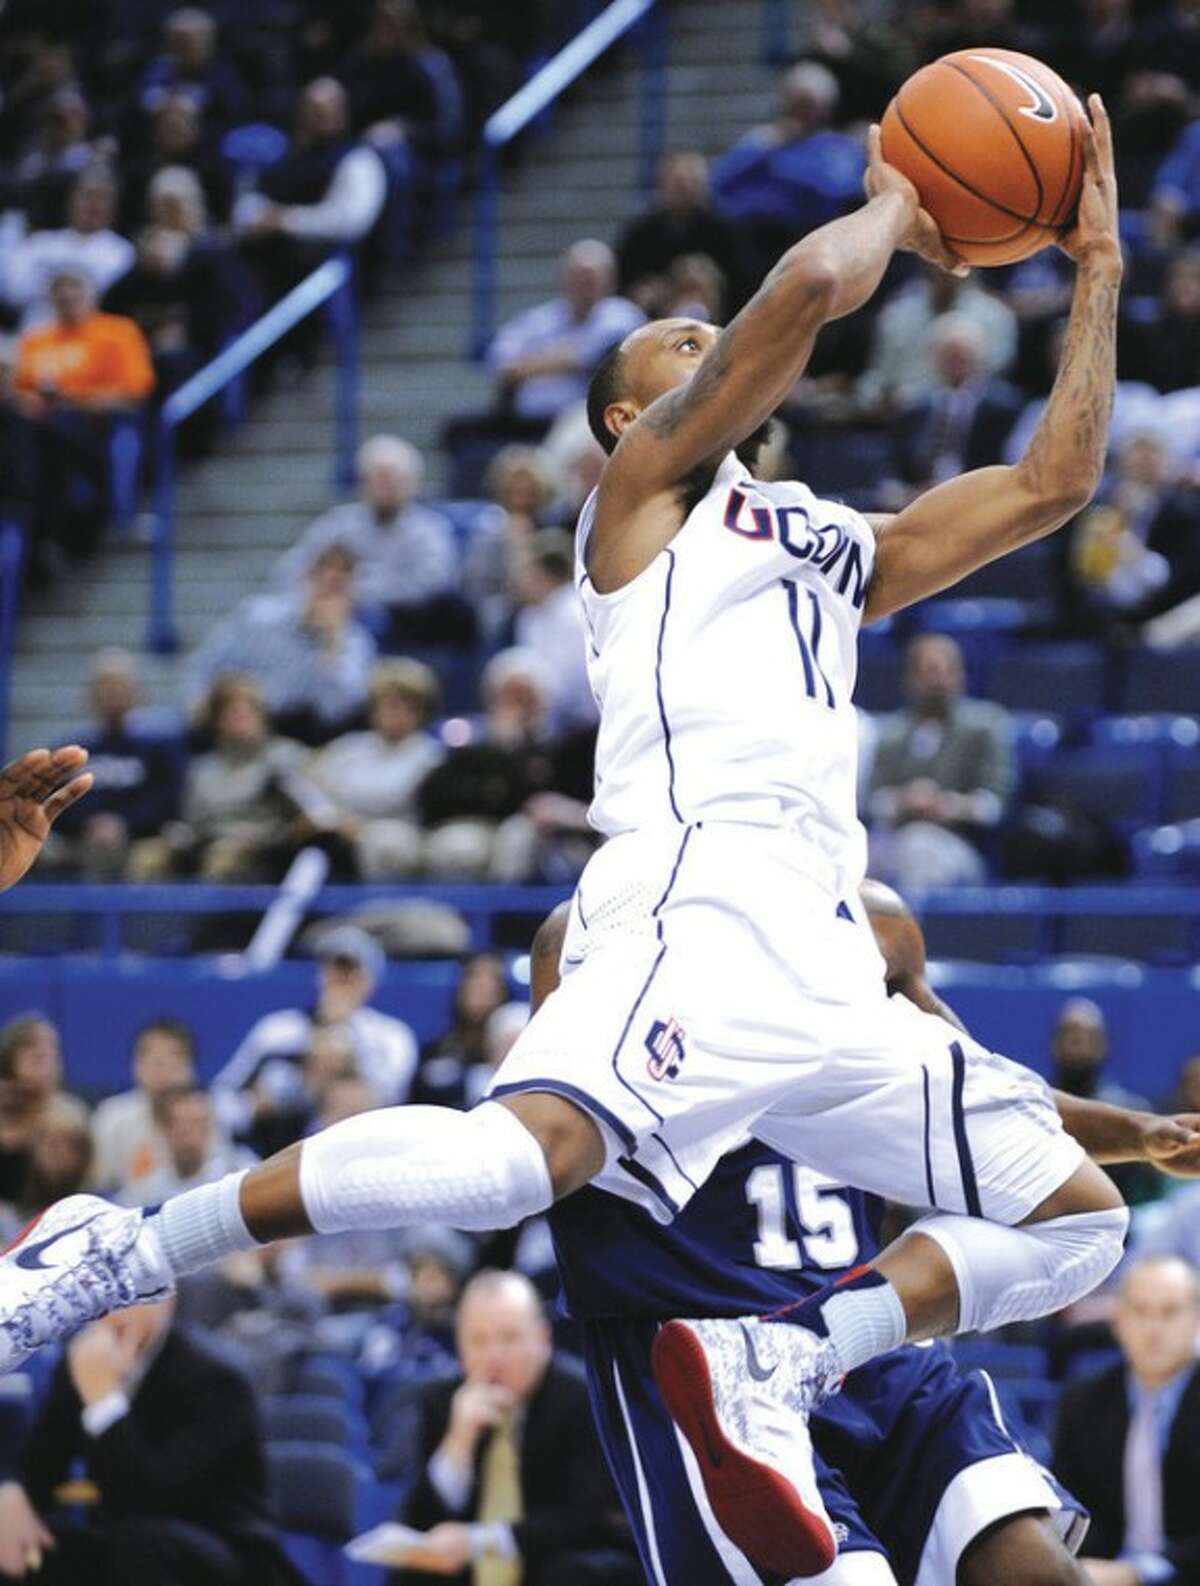 AP photo UConn's Ryan Boatright drives during Thursday's game against New Hampshire. UConn scored a 61-53 victory.